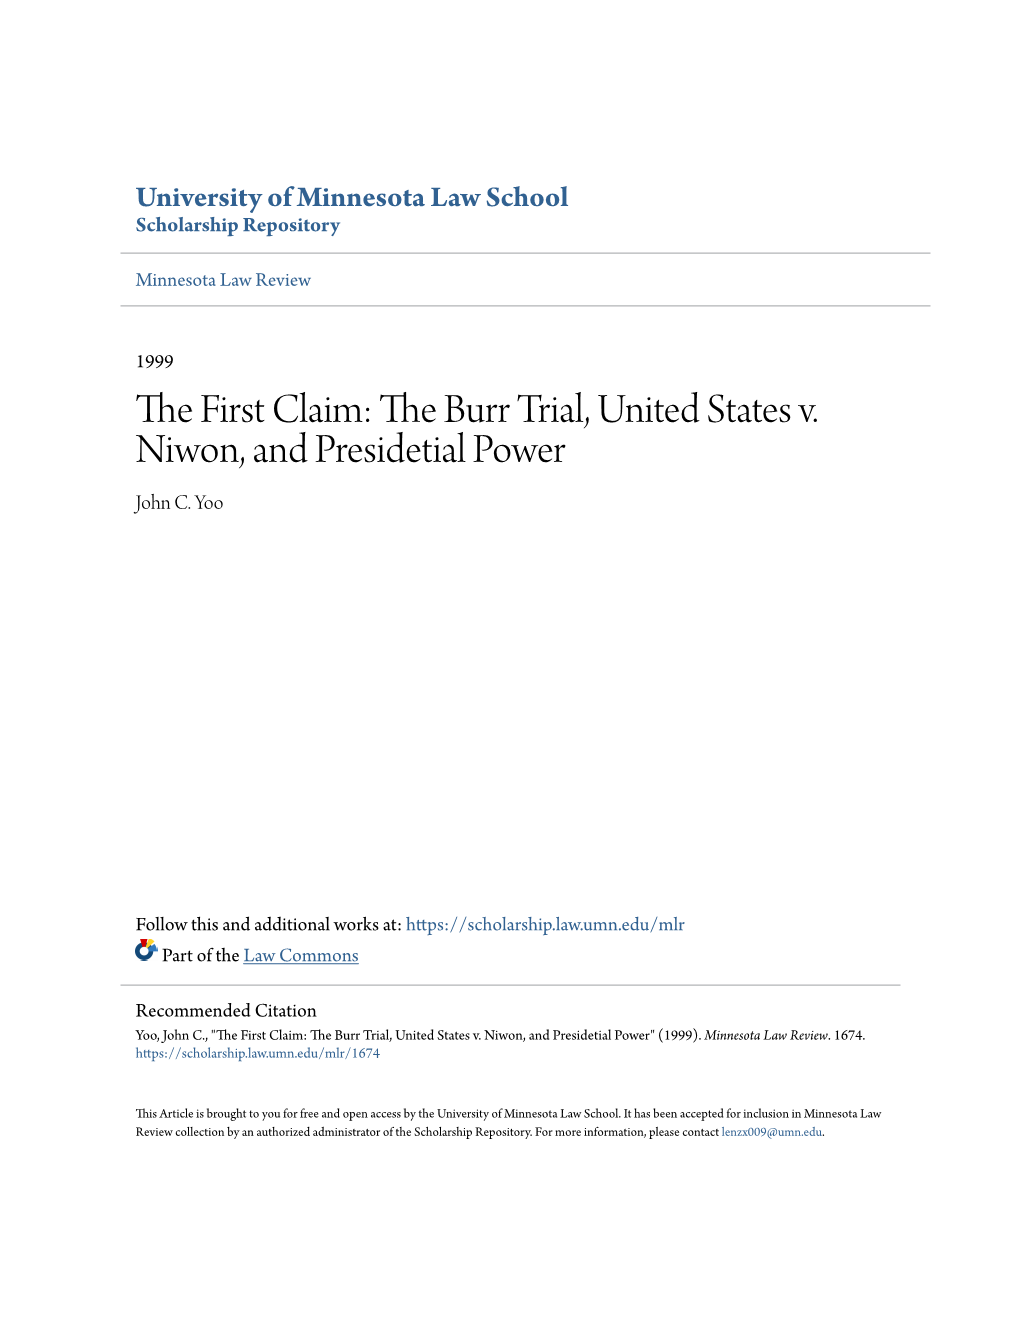 The Burr Trial, United States V. Niwon, and Presidetial Power